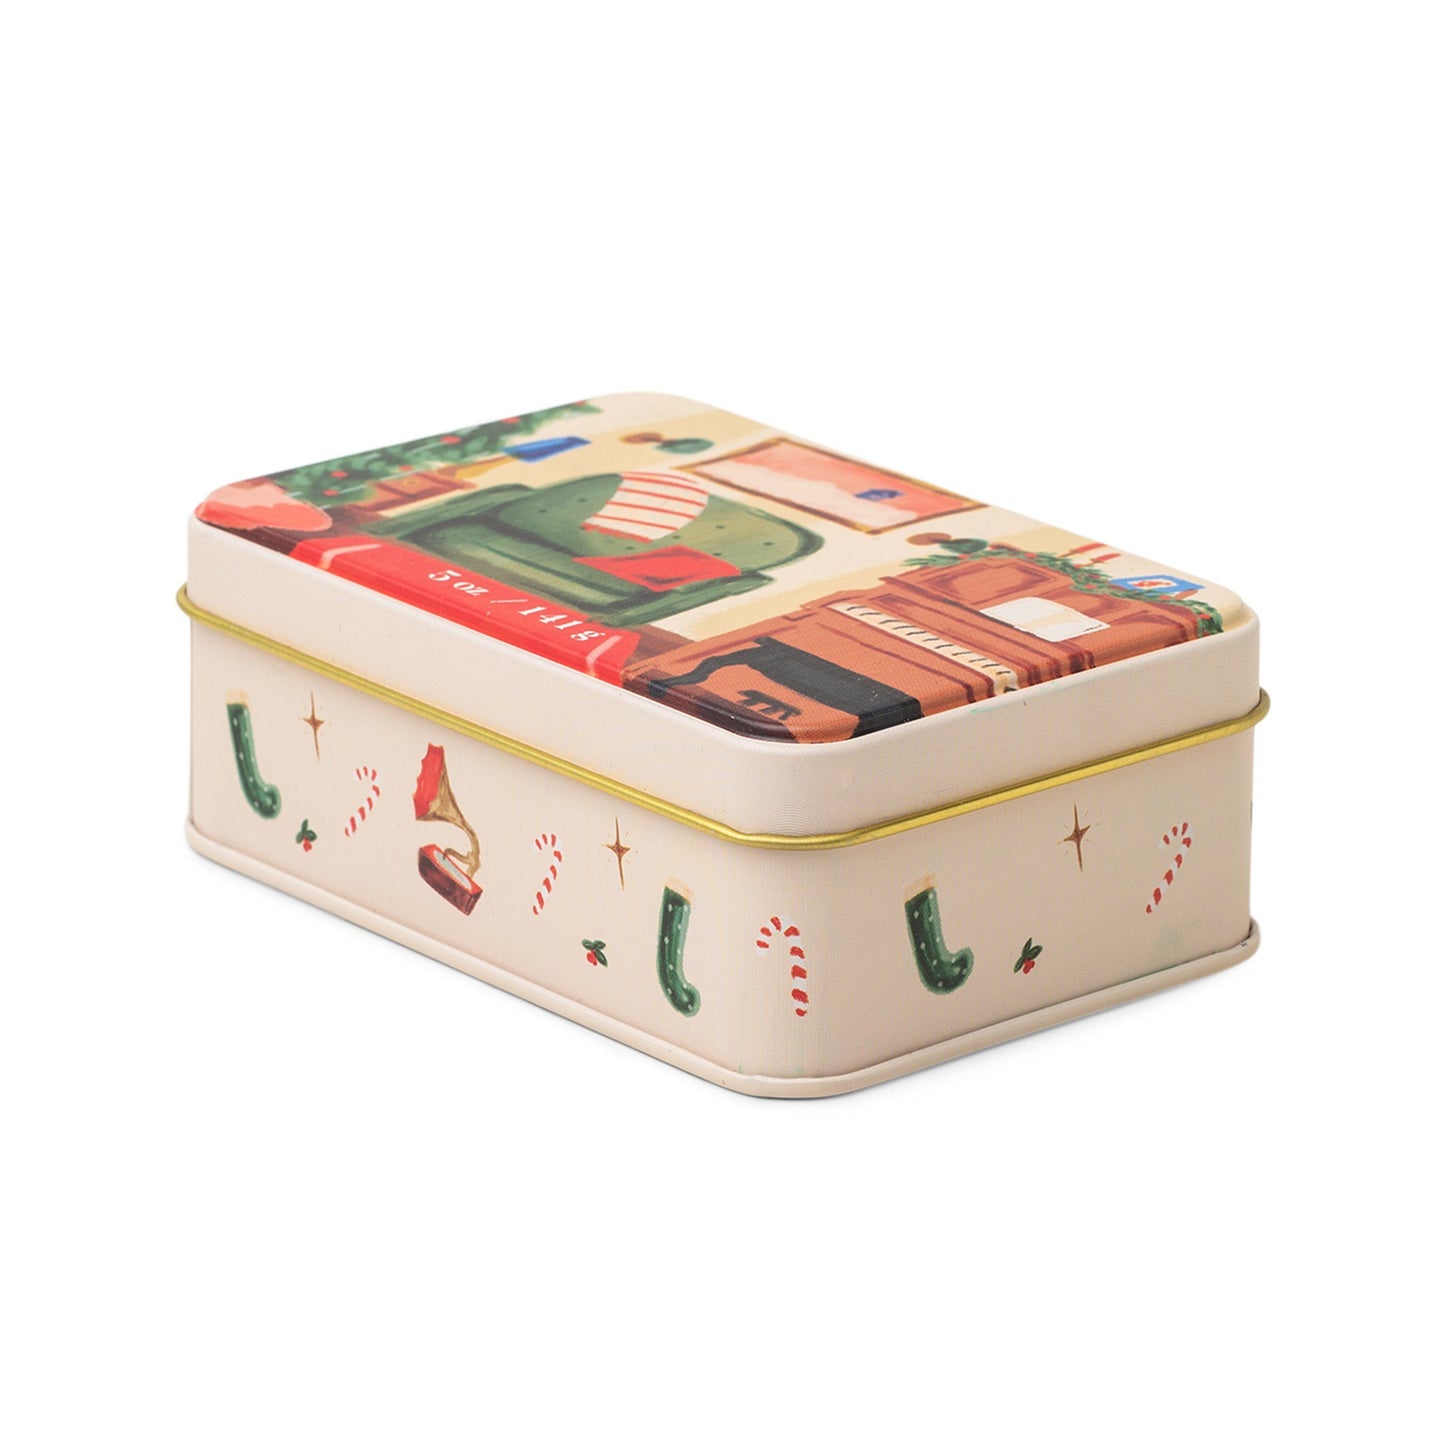 5 oz holiday tin with custom artwork; lid shows family room with piano and decorated tree; sides of the tin have stockings and candy canes